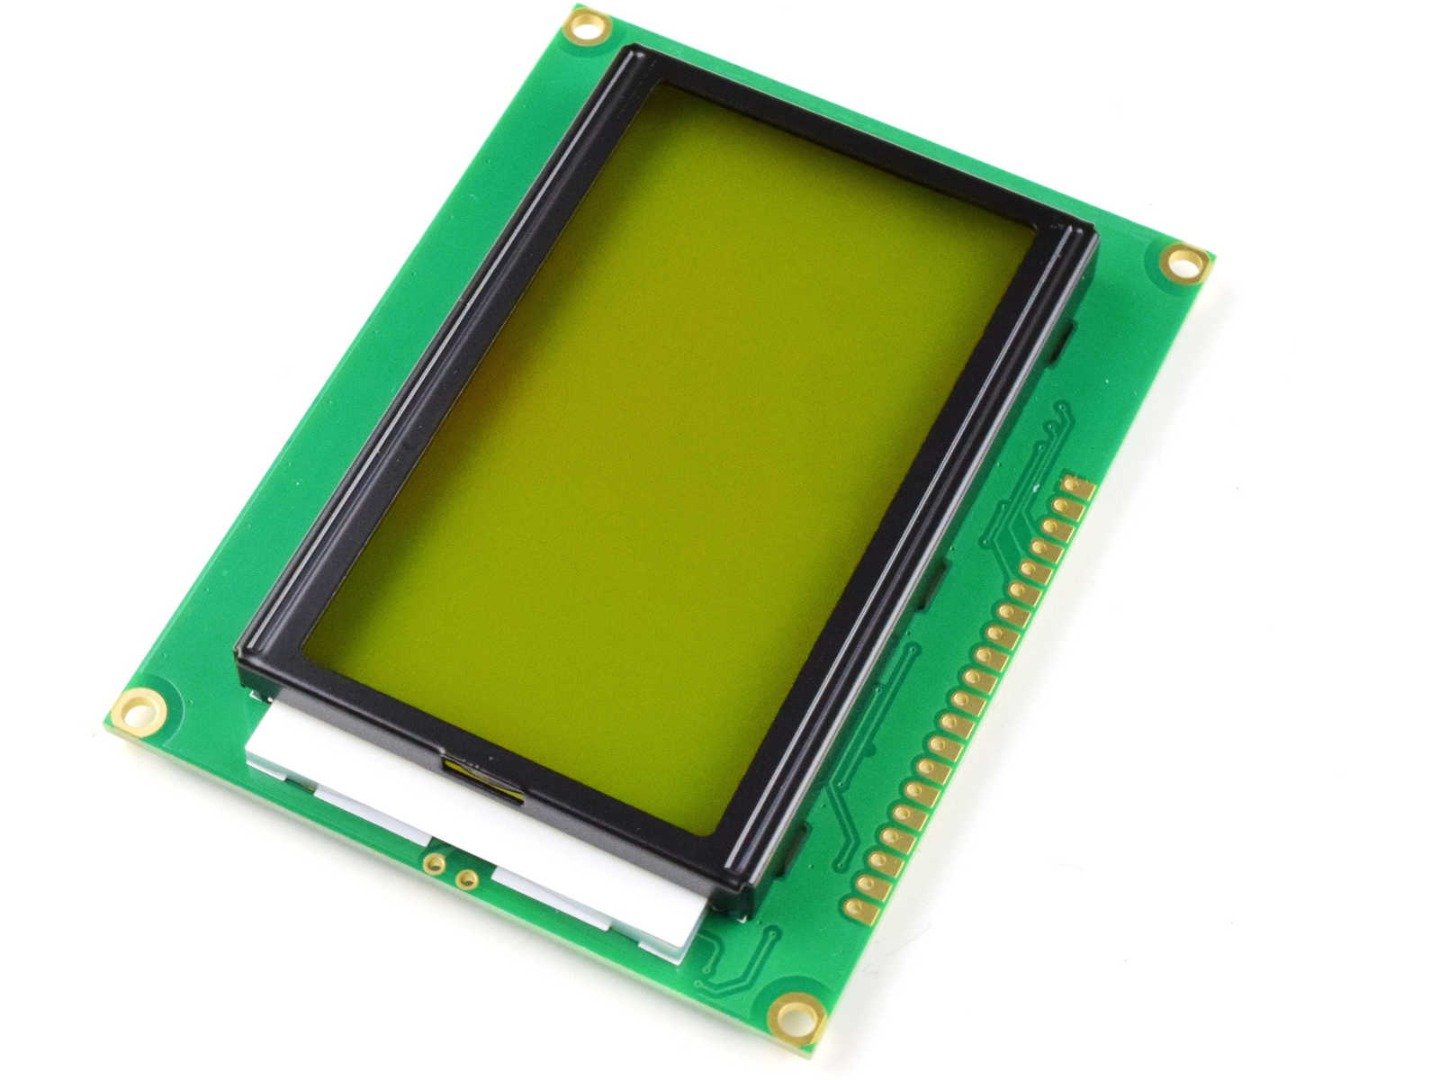 LCD12864 128×64 Graphic Display SPI, green-yellow, ST7920 5